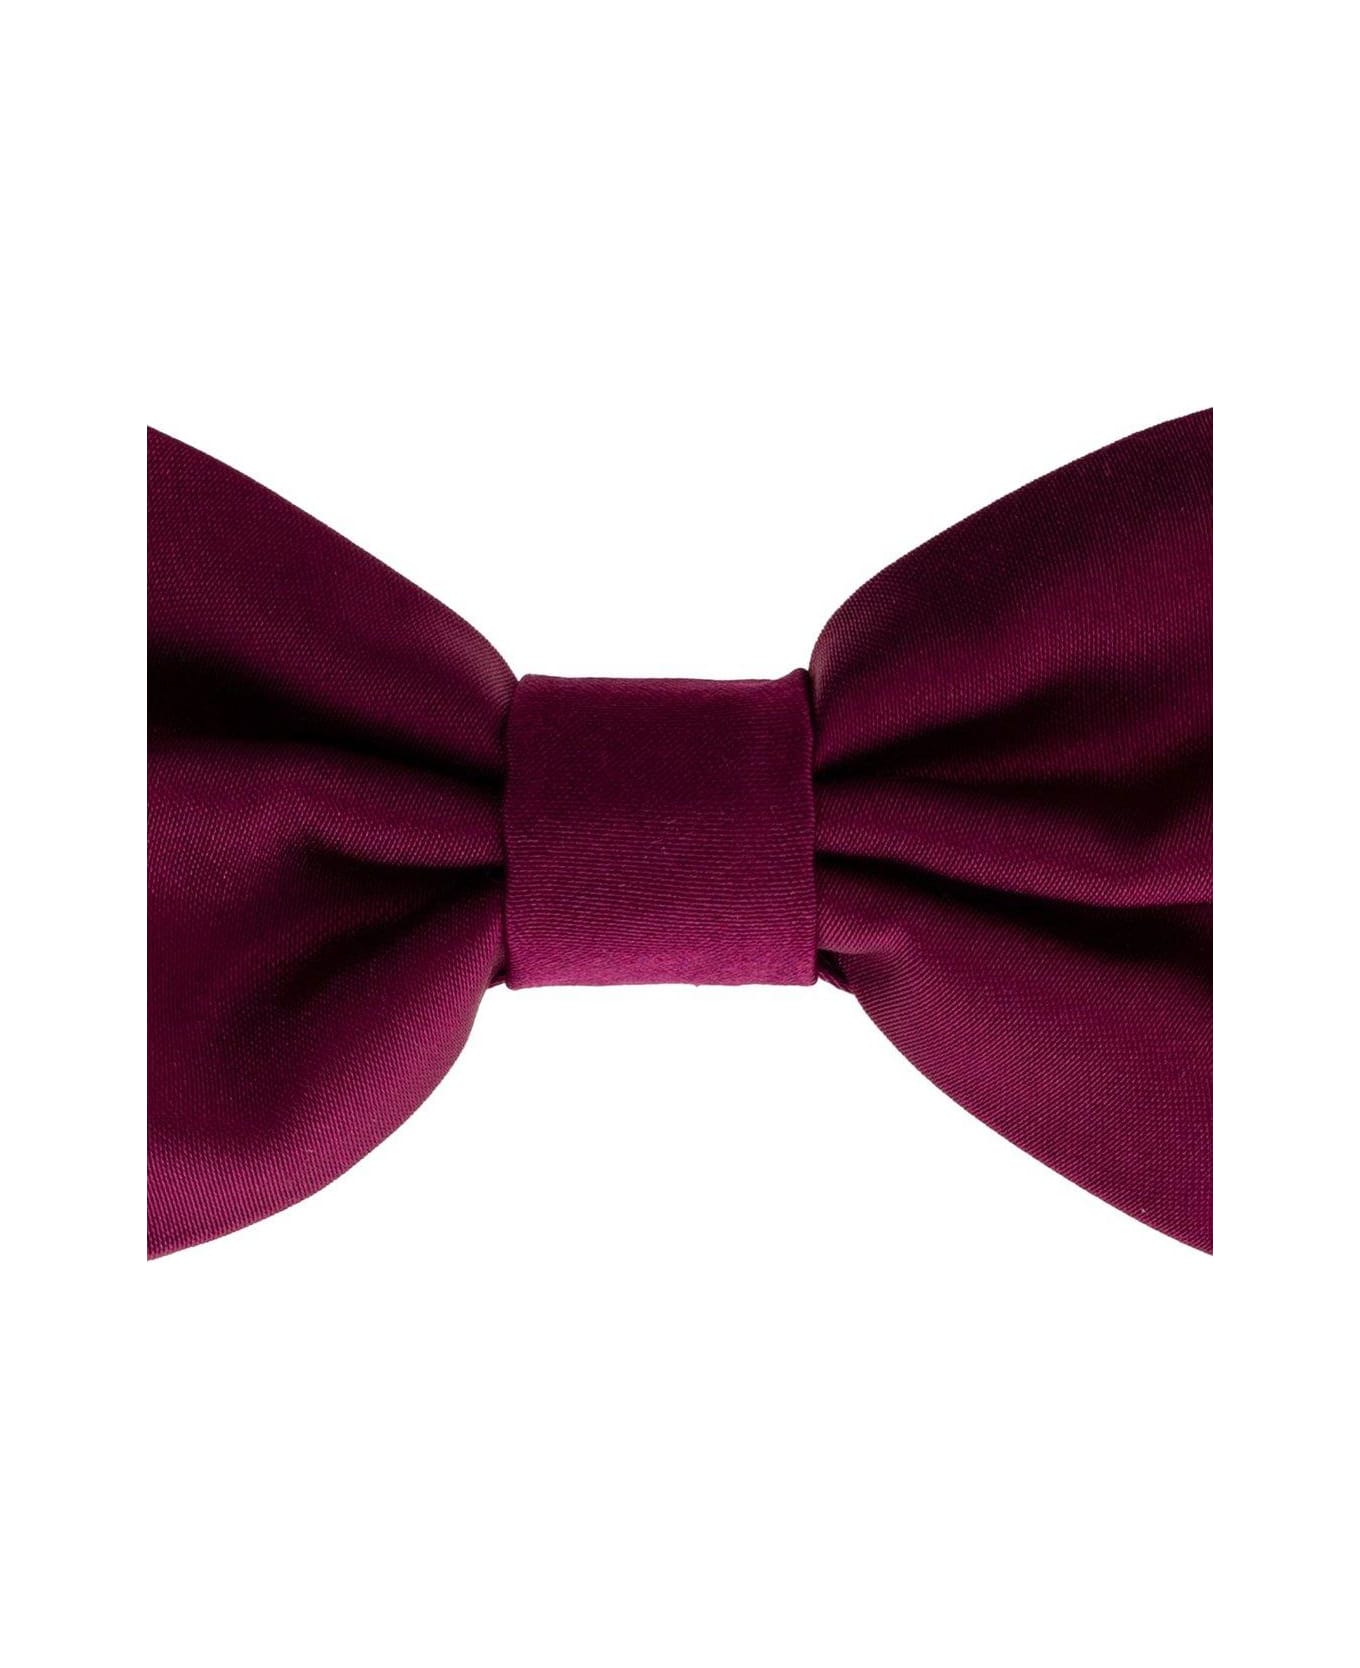 Dolce & Gabbana Bow Tie - Red ネクタイ